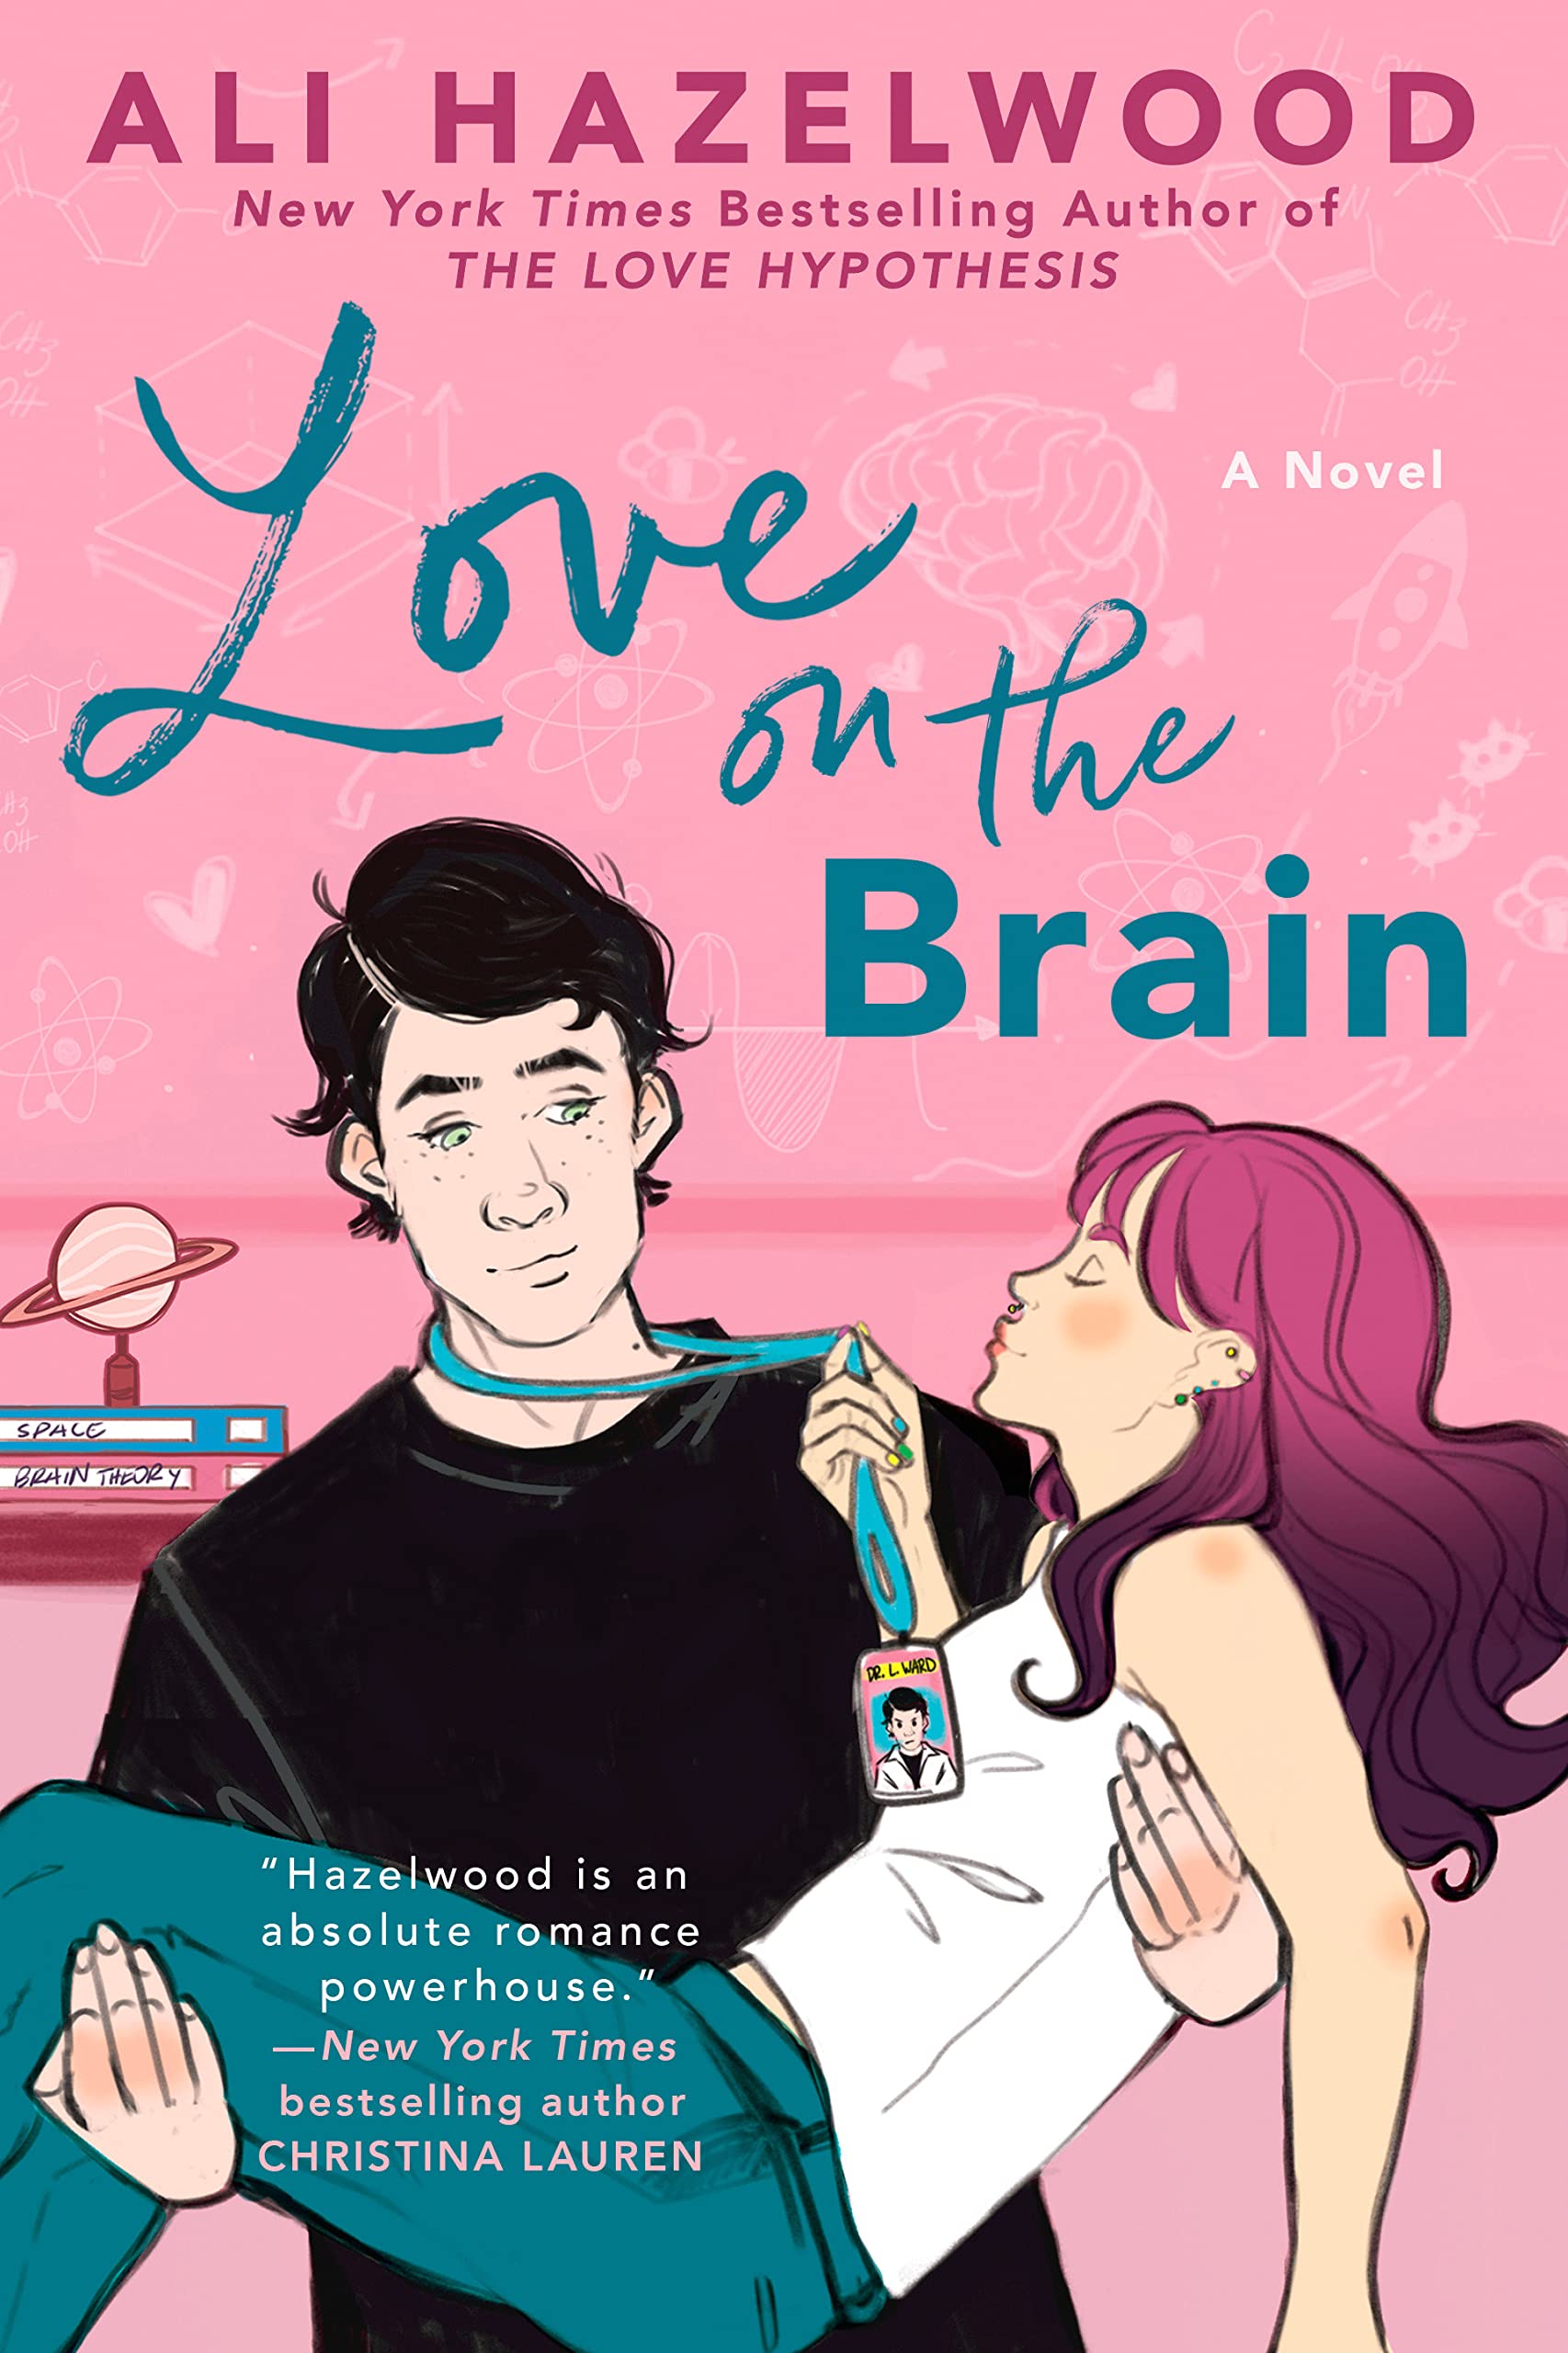 Cover of Love on the Brain, featuring a dark-haired man carrying a pink-haired woman in his arms in front of a pink background